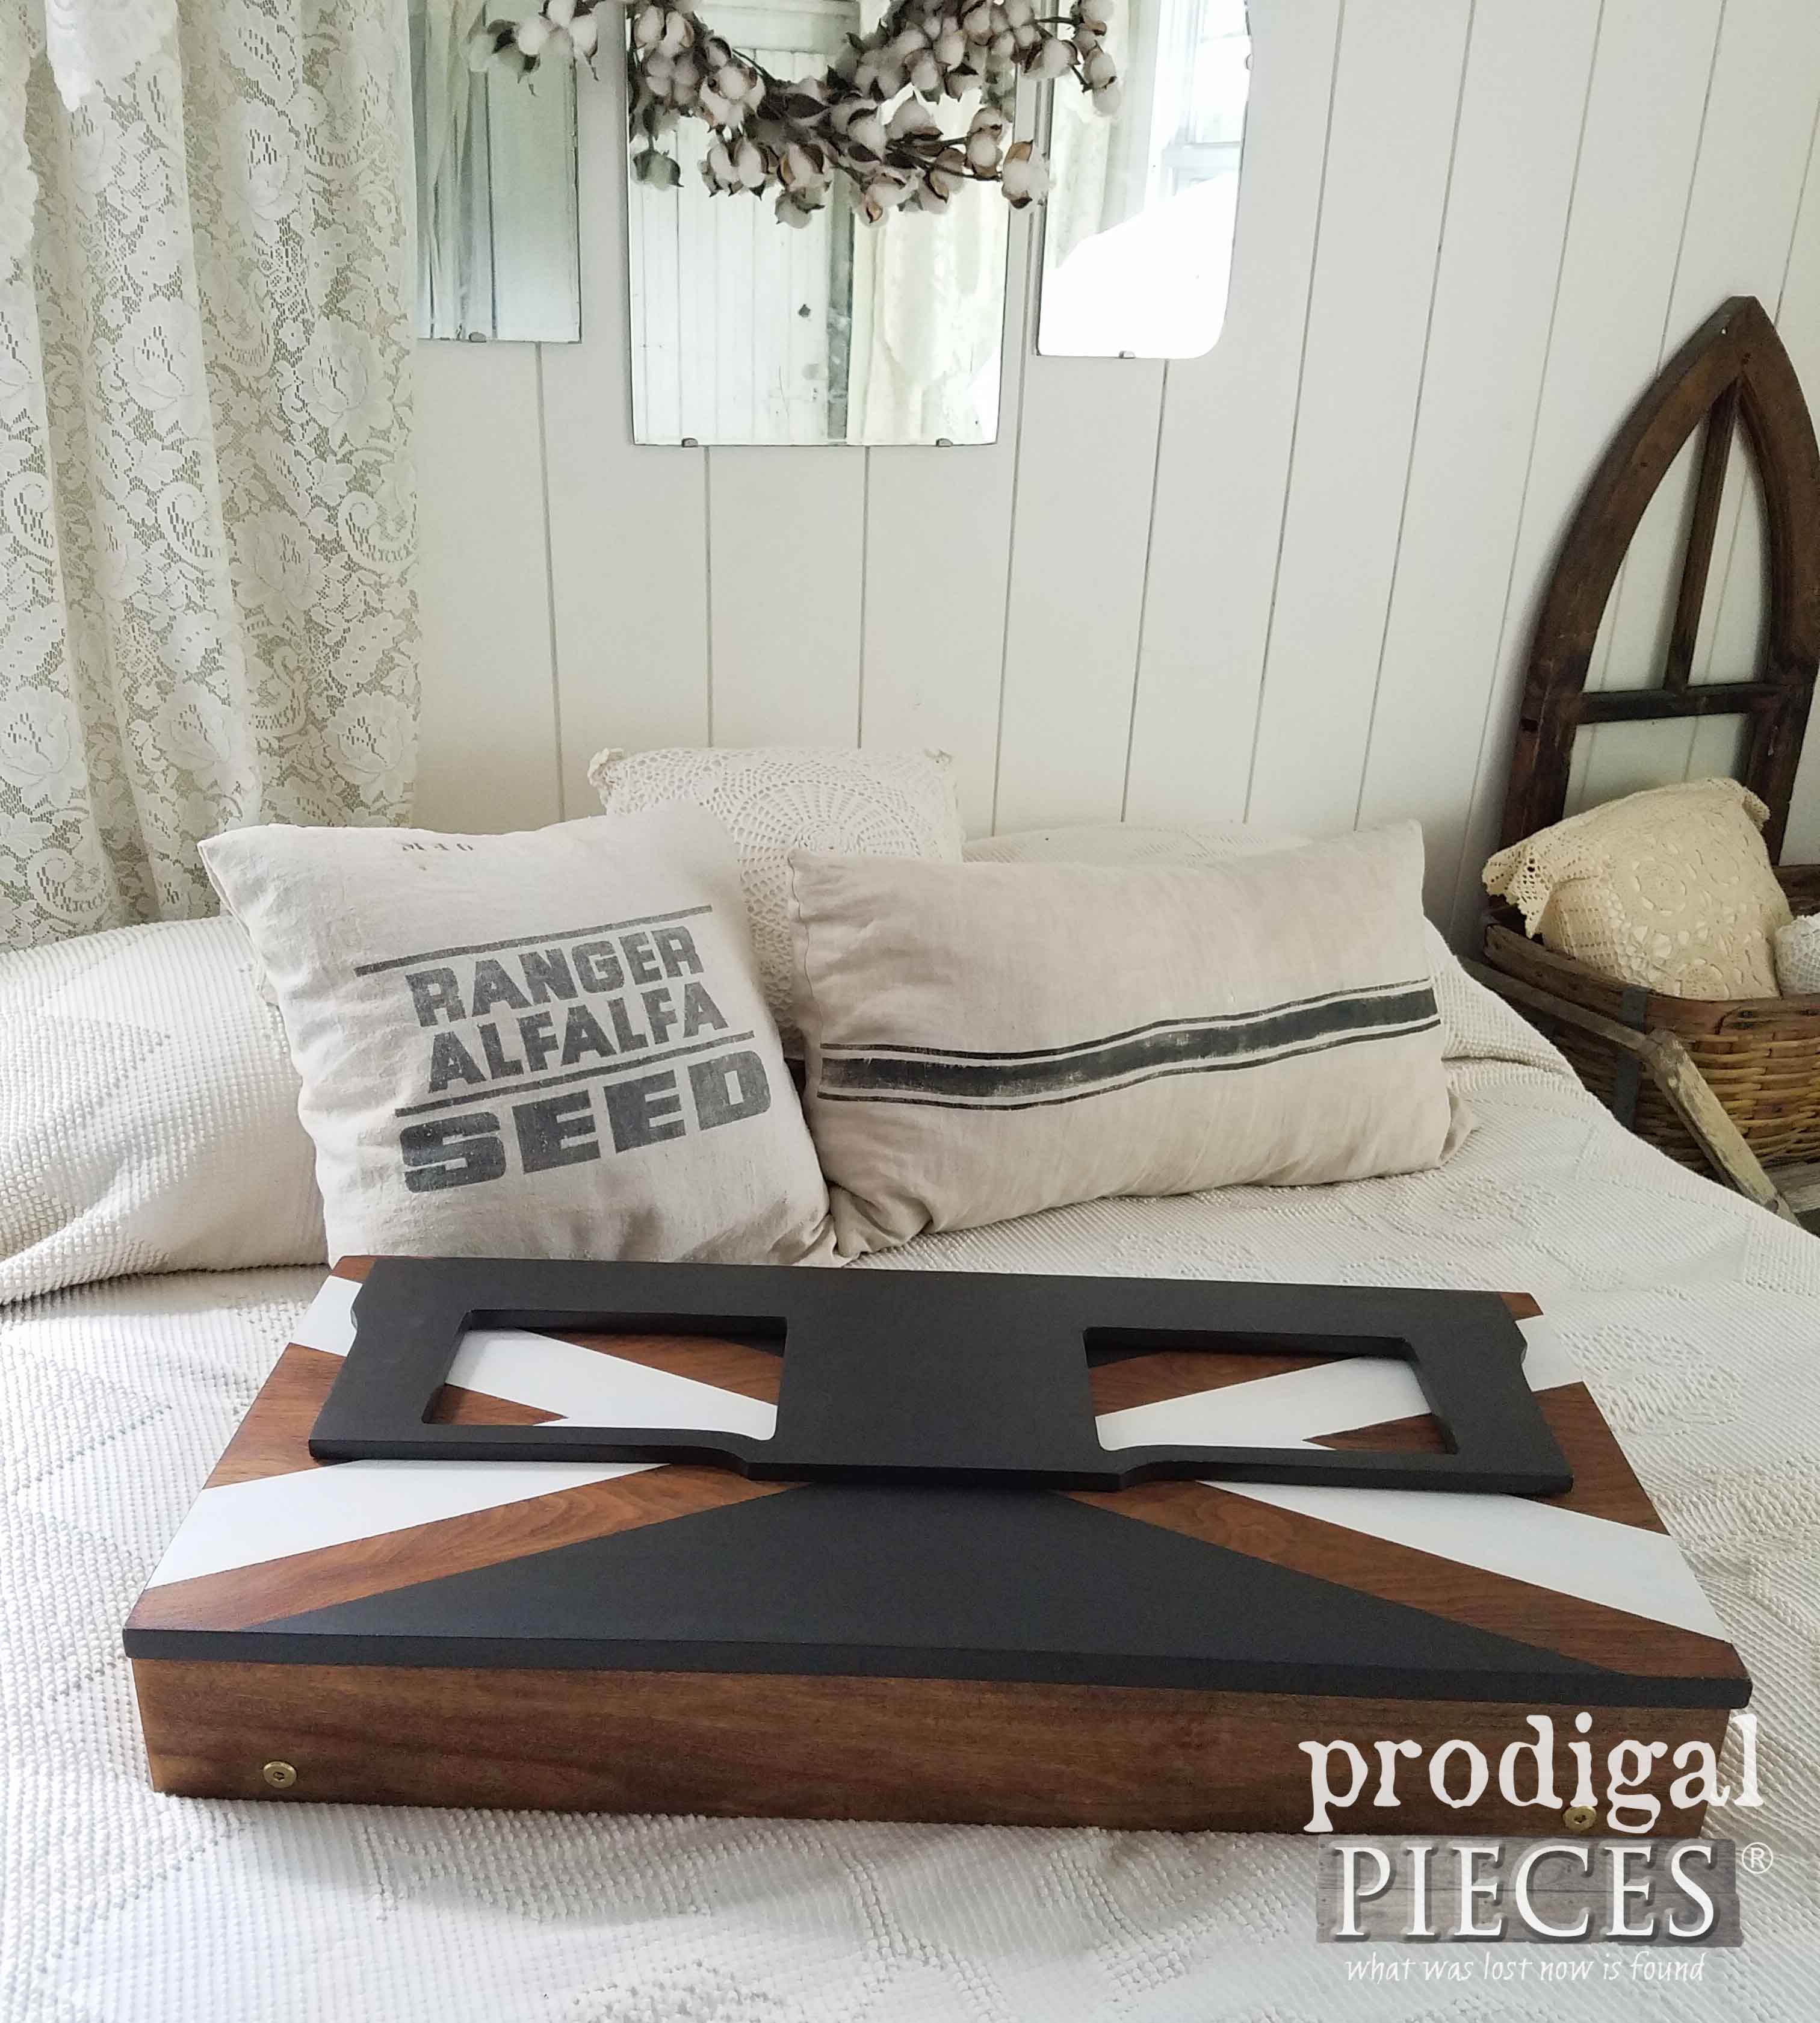 Folded Lap Desk Created from Repurposed Piano Bench by Prodigal Pieces | prodigalpieces.com